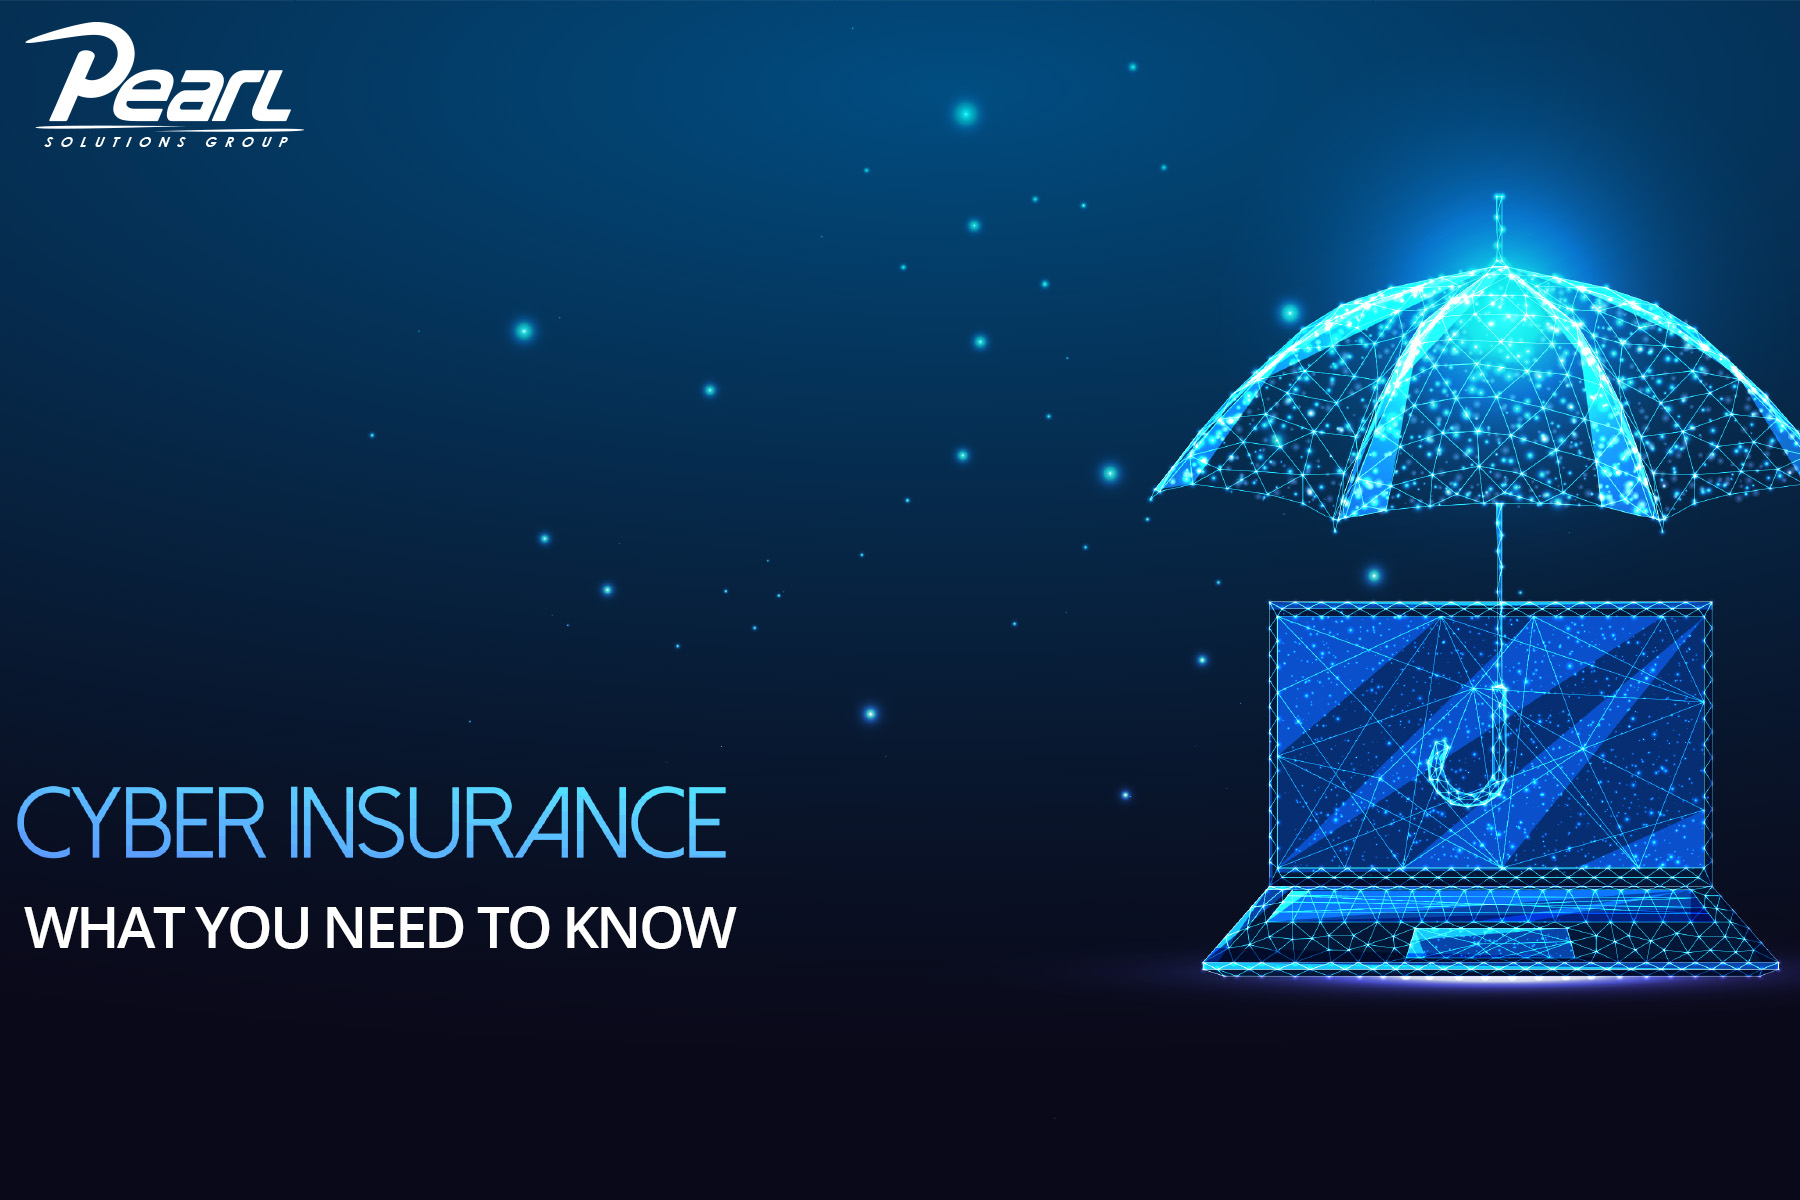 What you need to know about cyber insurance